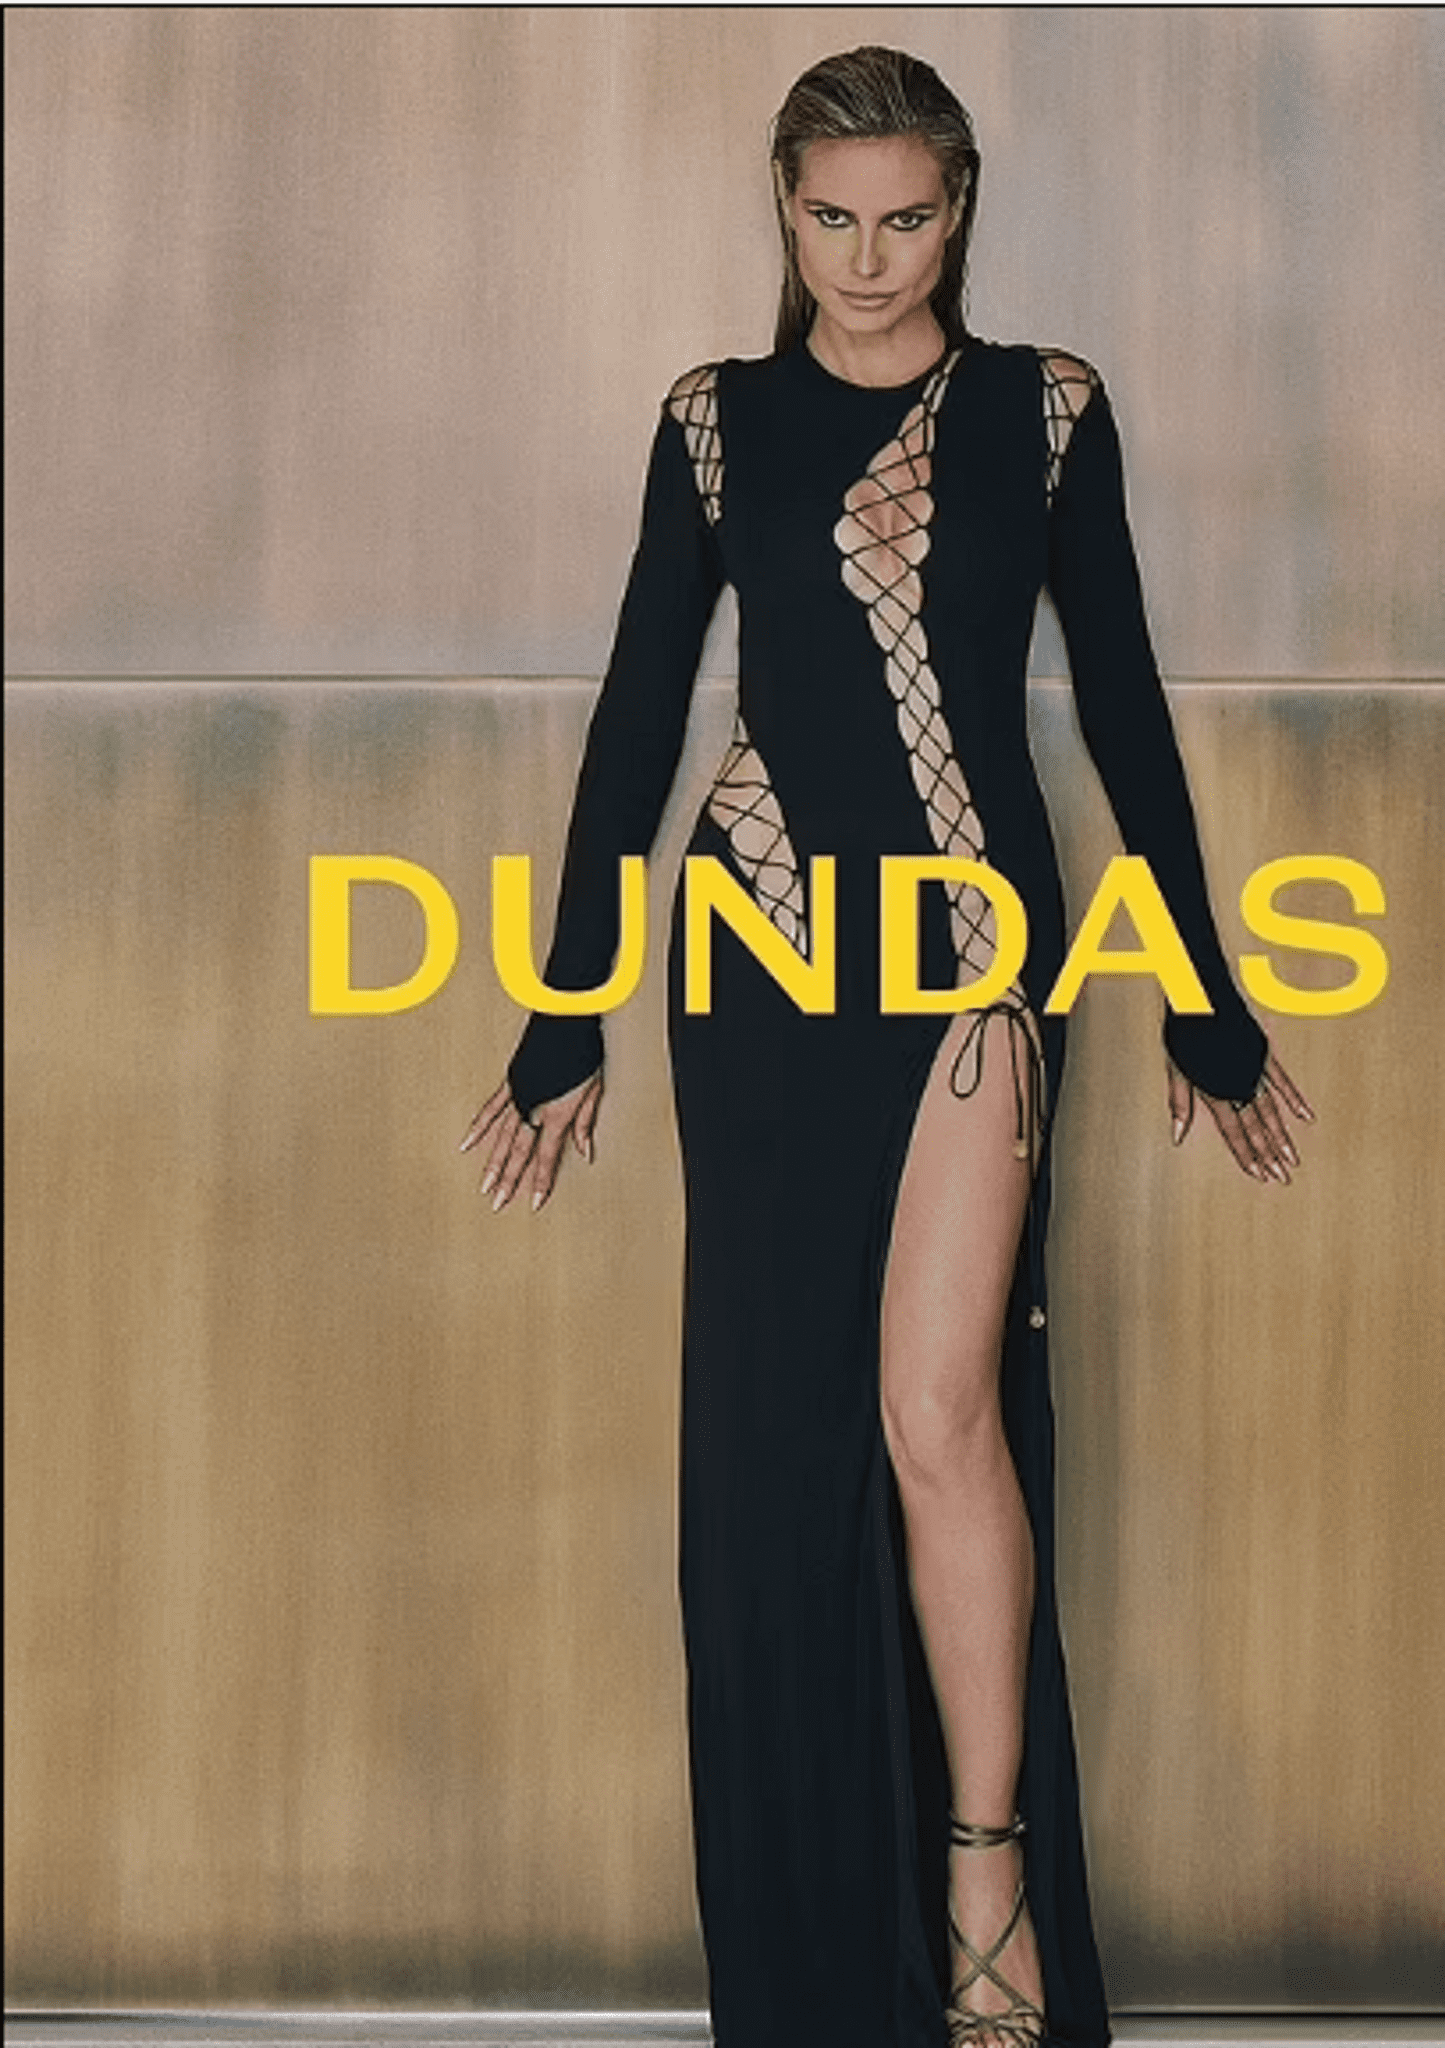 heidi-klum-showed-fatal-maxi-dresses-and-skimpy-swimwear-from-the-new-dundas-collection